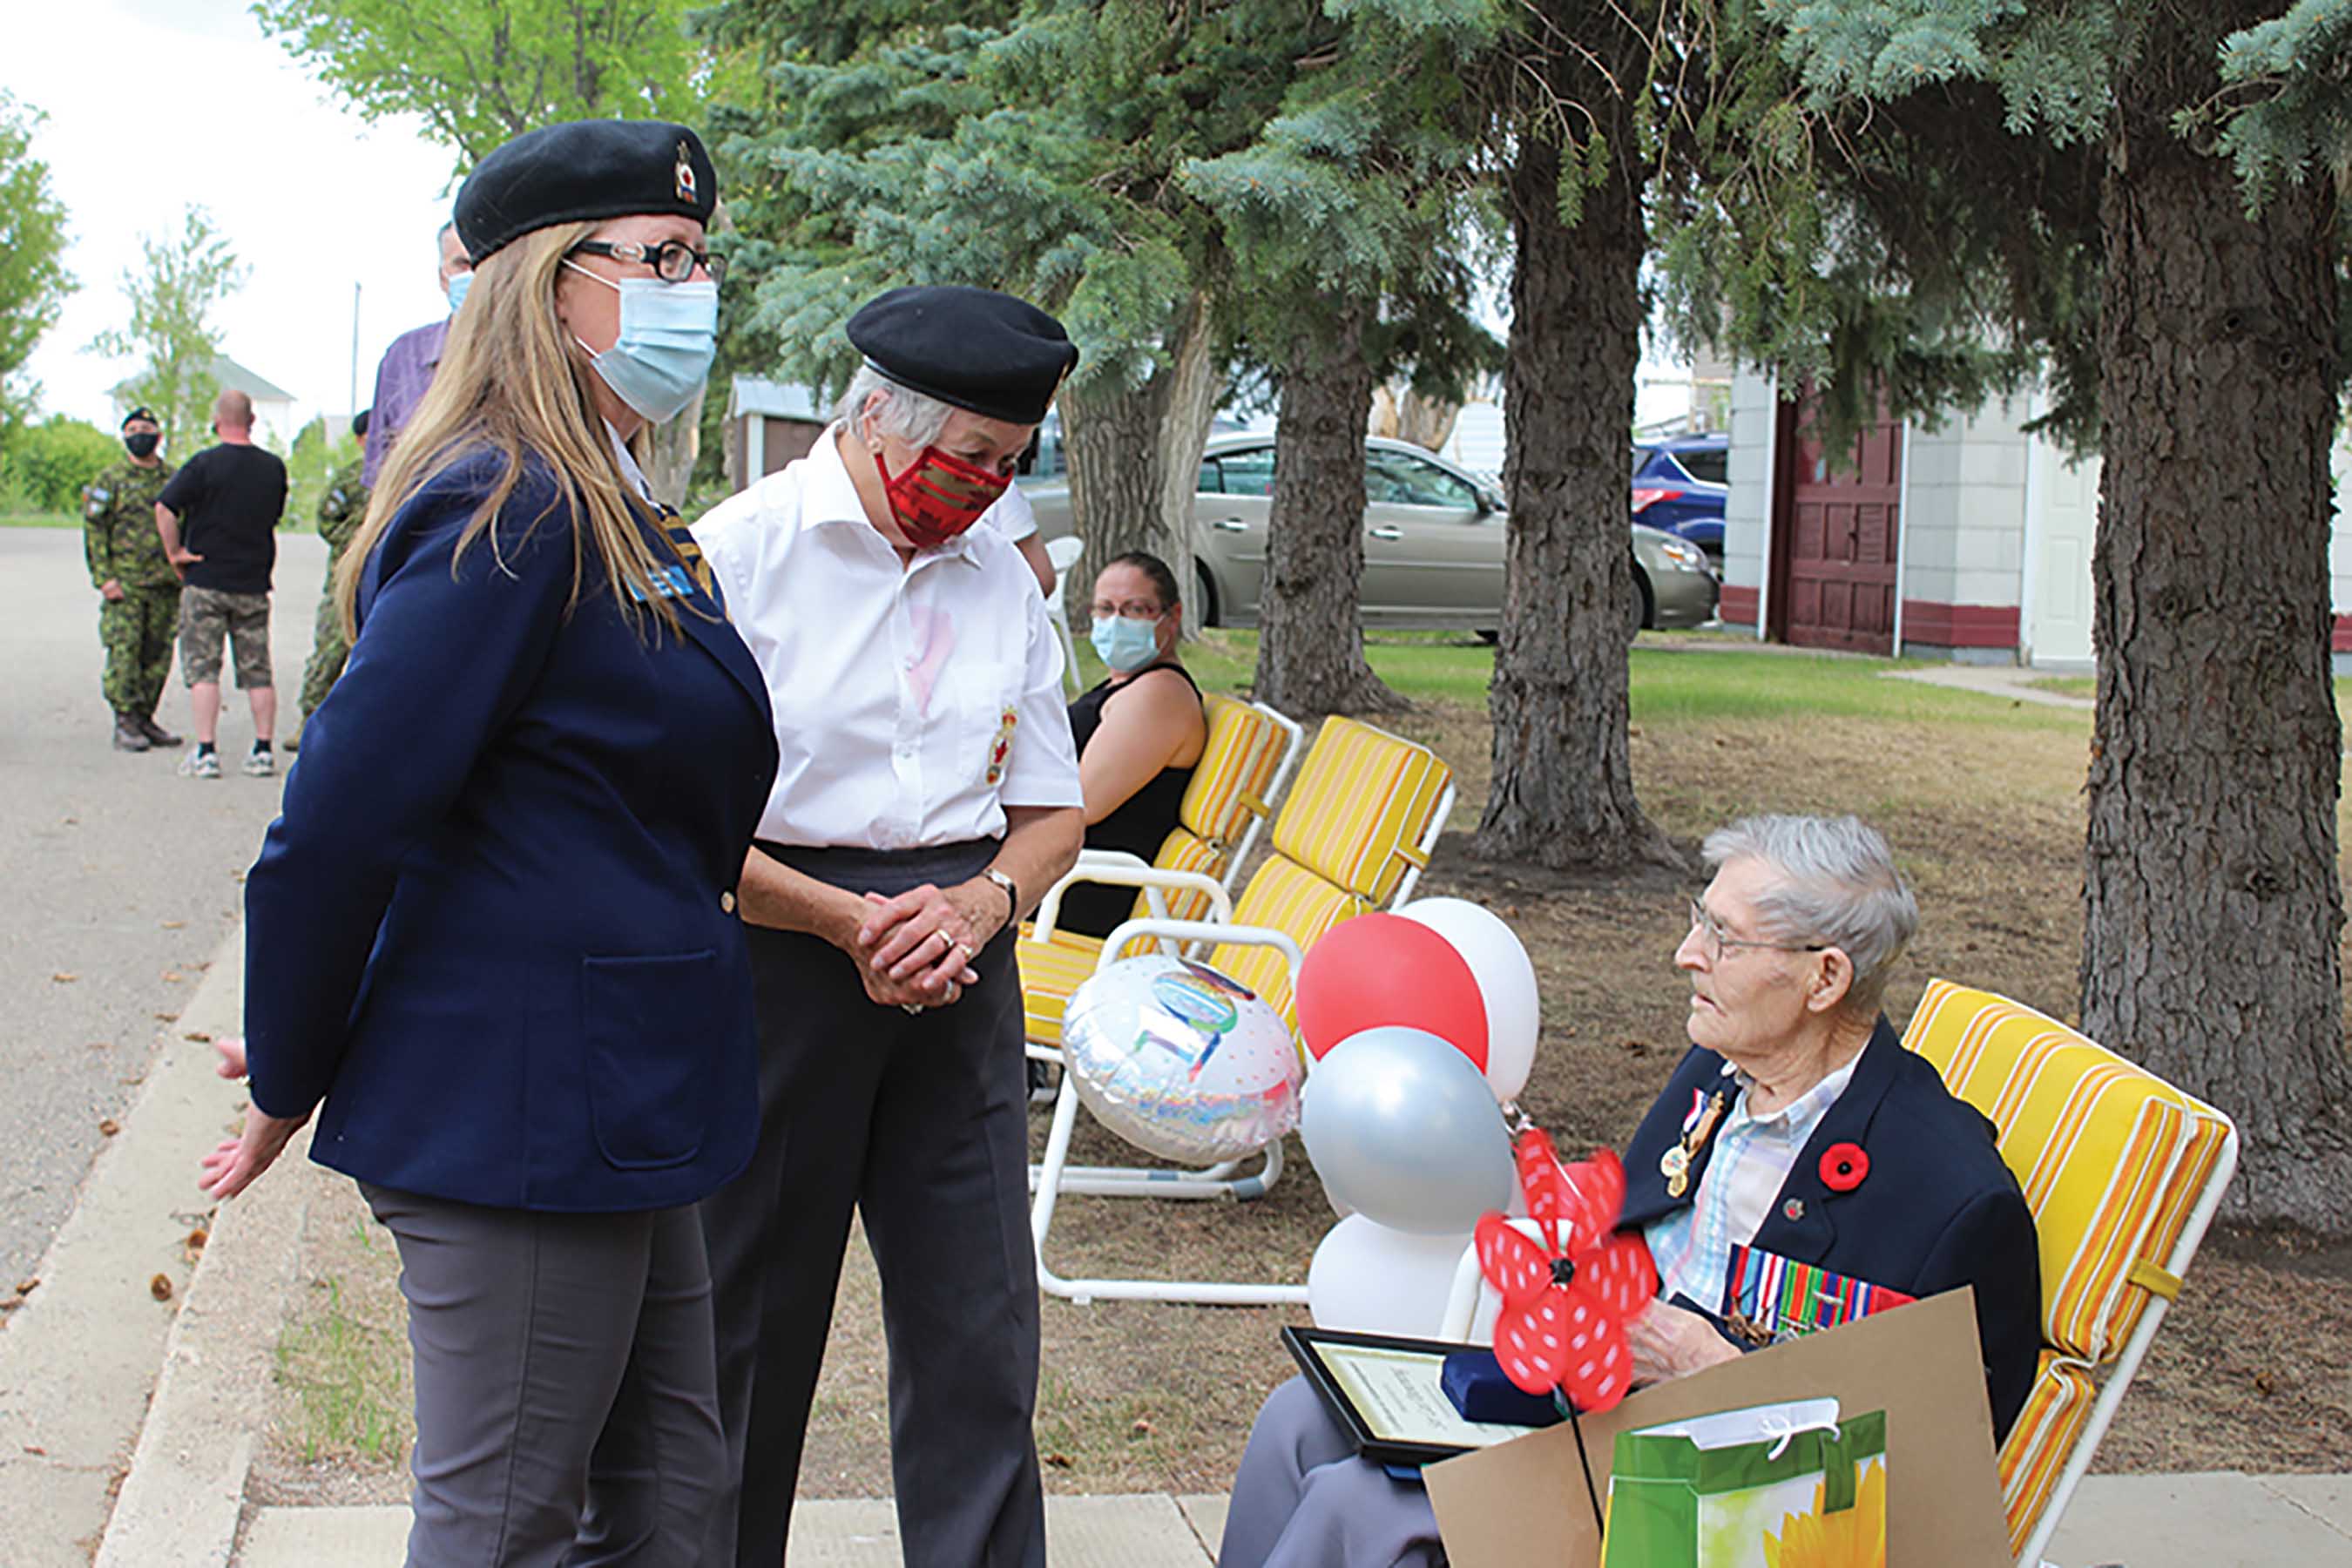 Shae Apland, left, President of Virden Legion branch and Joan Wright, right, District 2 RCL Commander, and Les Downing receiving recognition gifts for his 100 birthday and a lifetime of Royal Canadian Legion support.